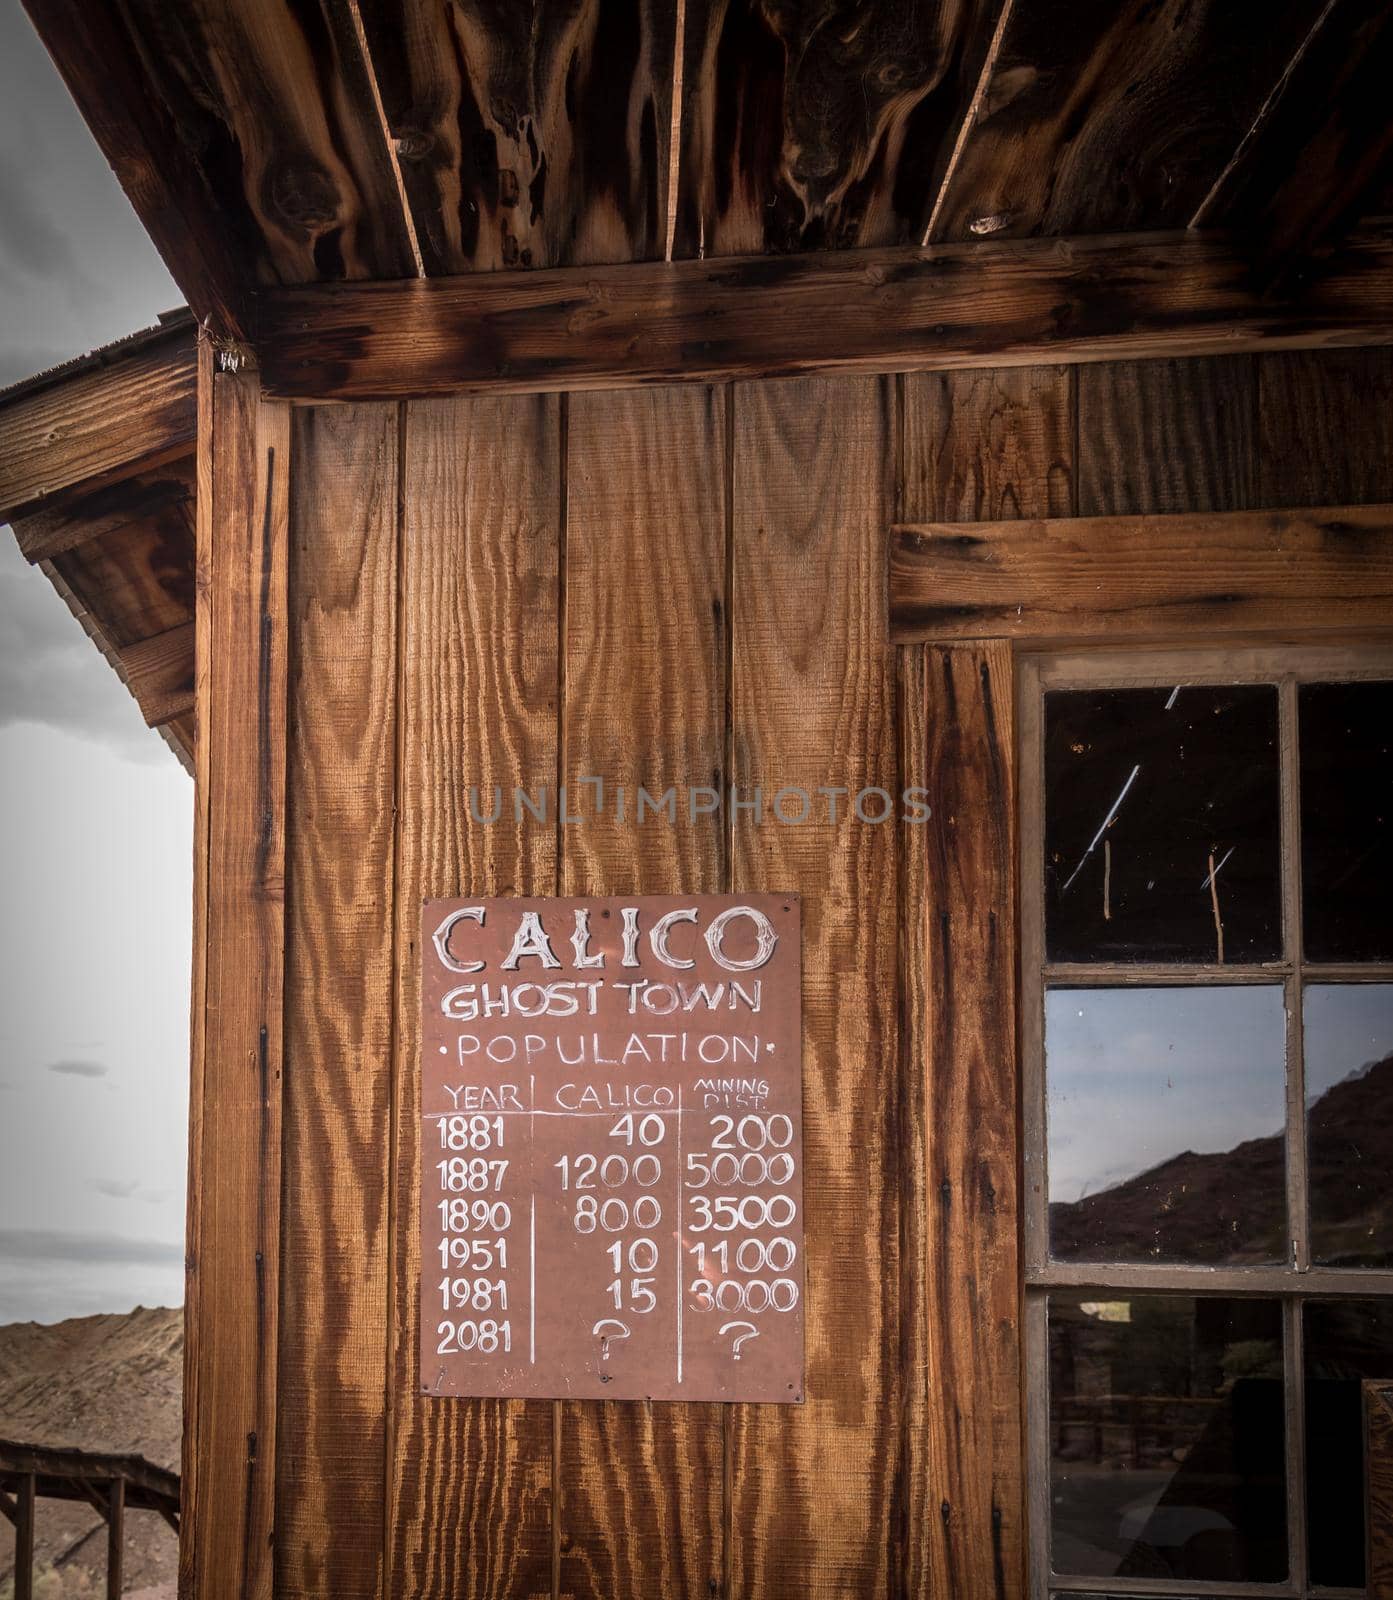 MAY 23. 2015- Town hall in Calico, CA, USA: Calico is a ghost town in San Bernardino County, California, United States. Was founded in 1881 as a silver mining town. Now it is a county park.